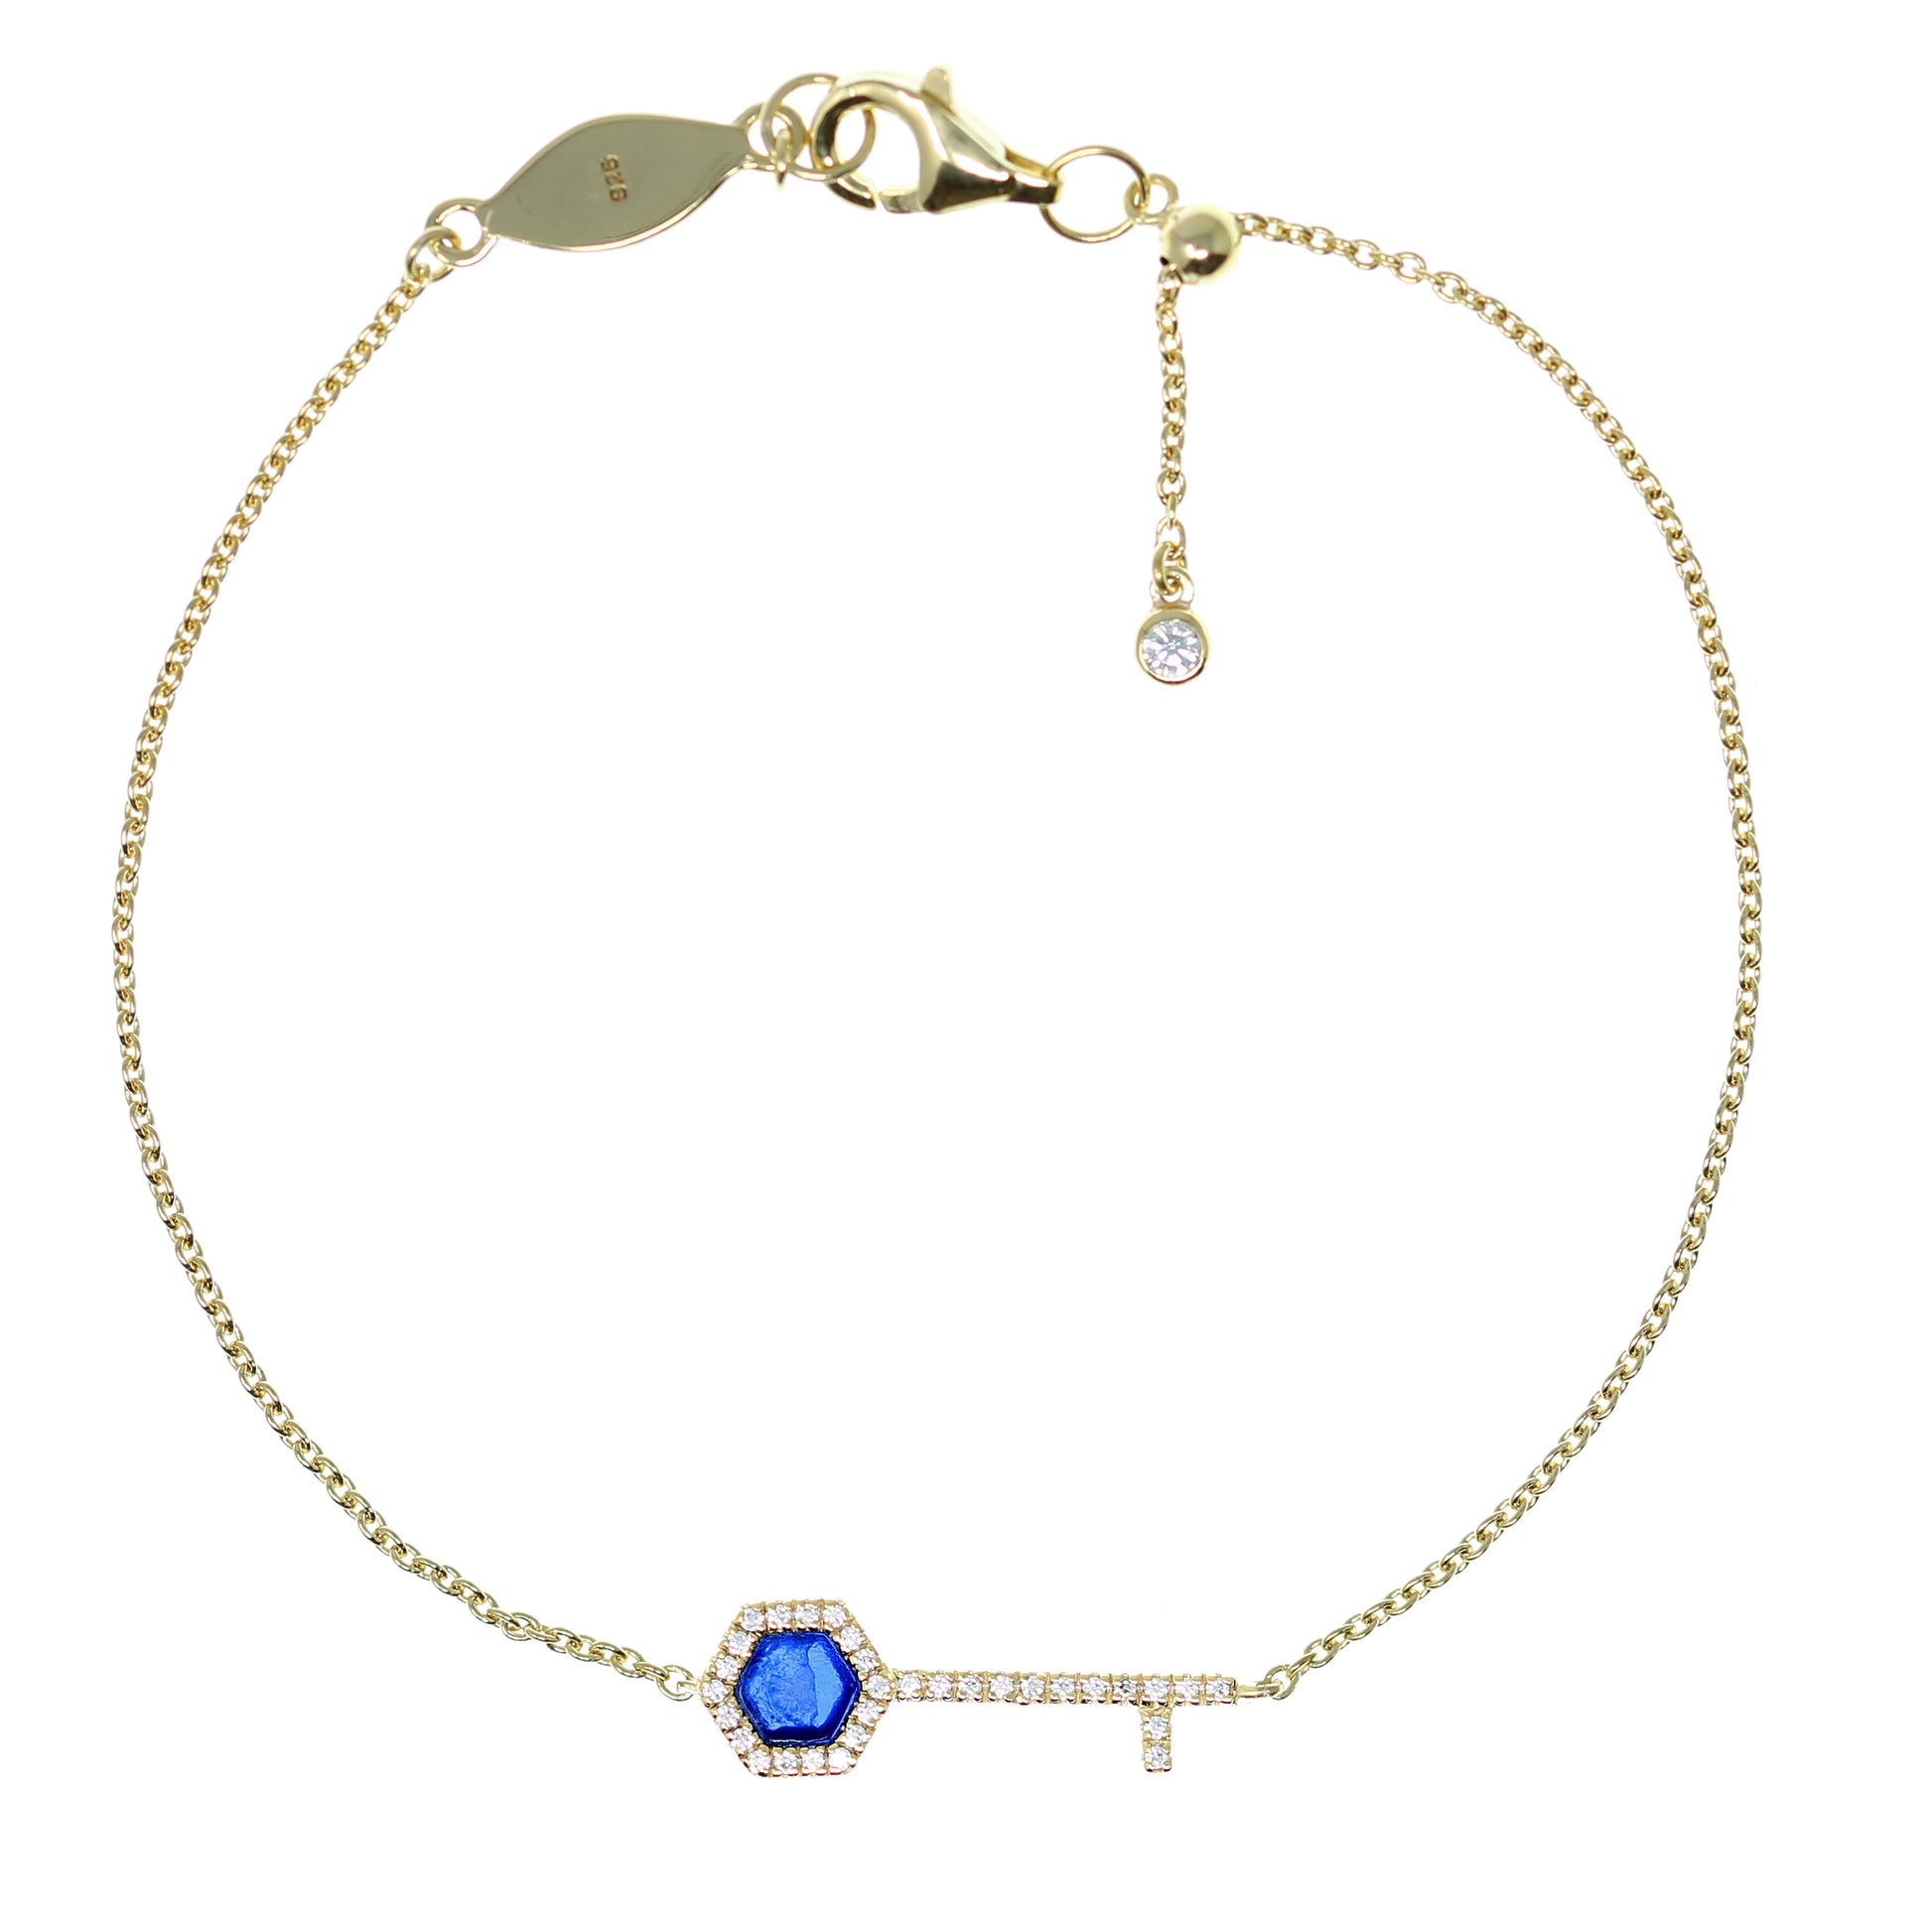 
Gold-plated silver chain bracelet with key-shaped blue stone pendant and adjustable slider ball.

